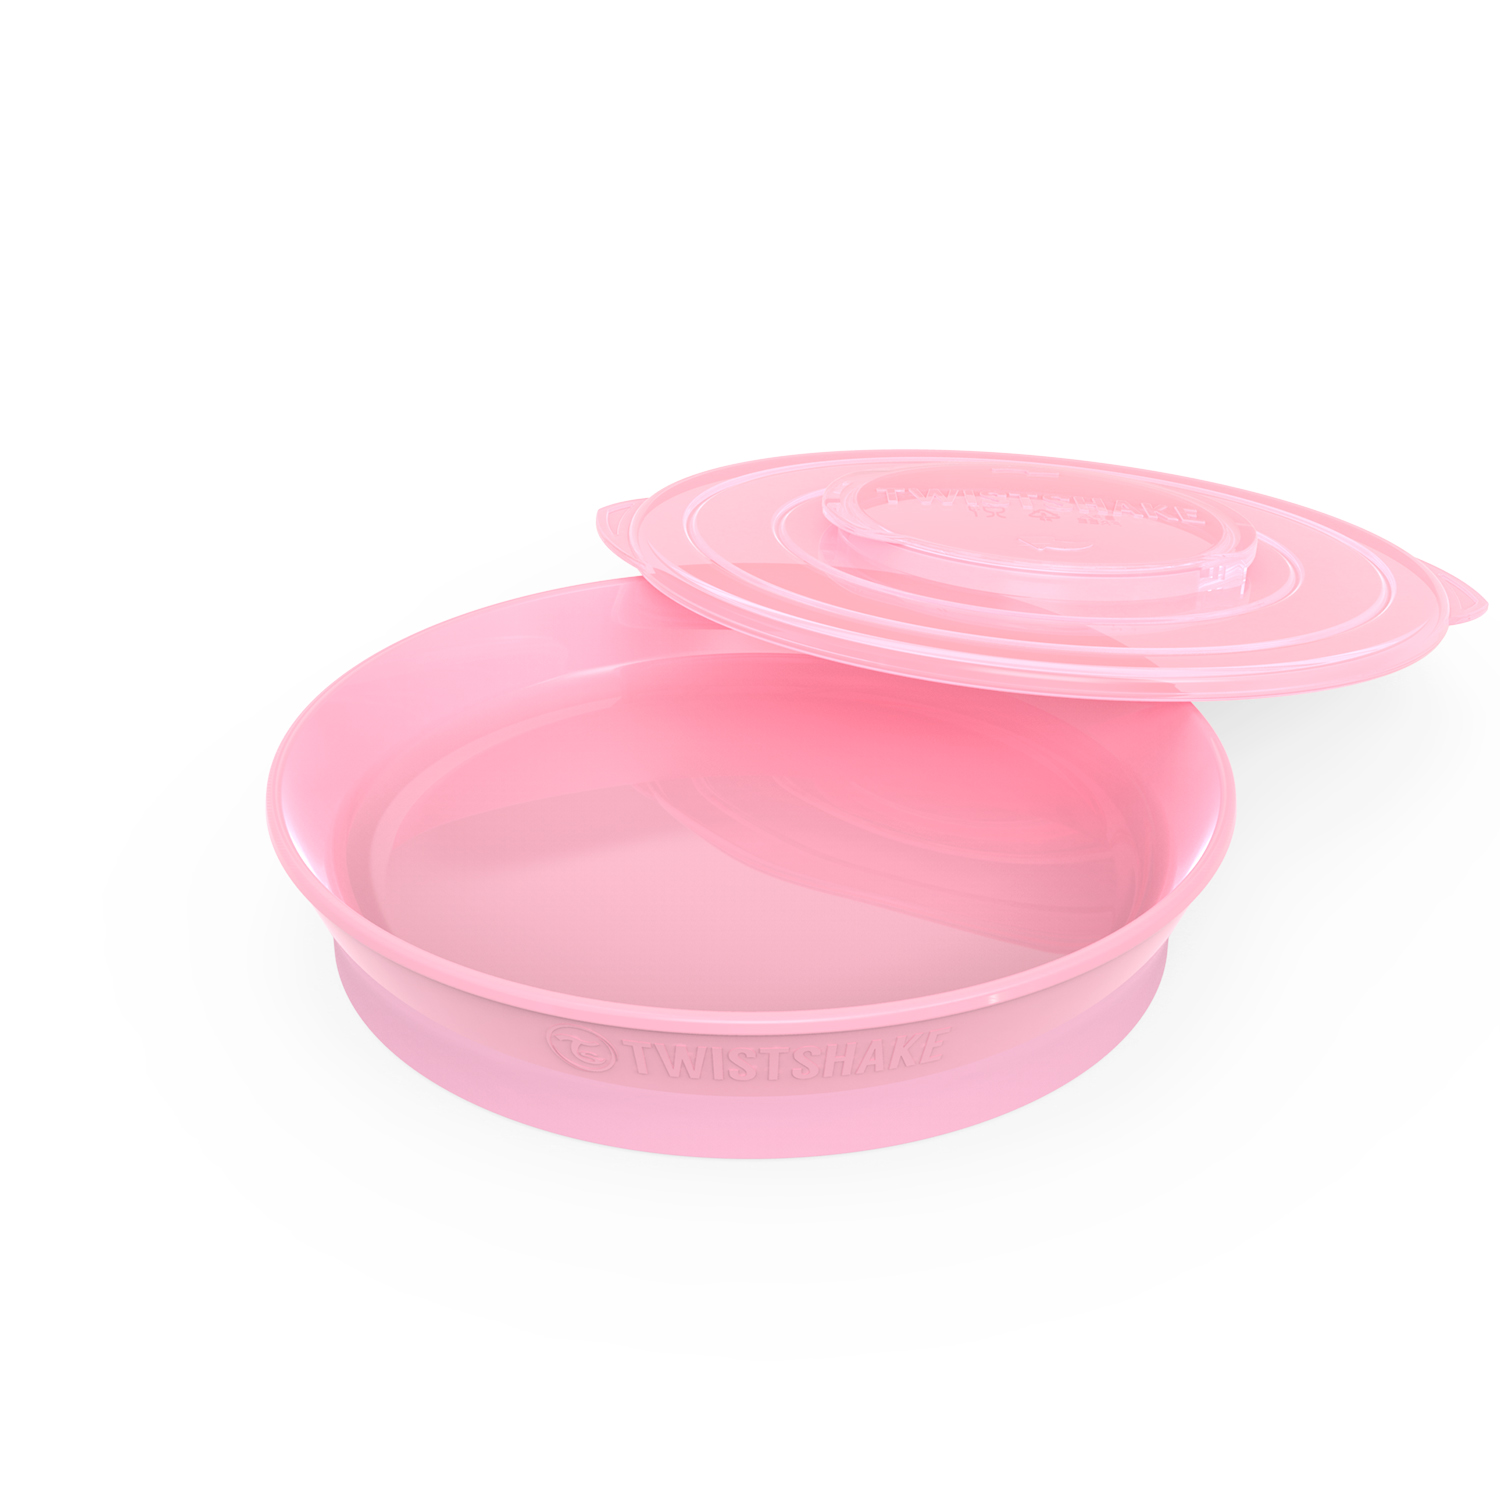 Plate pink